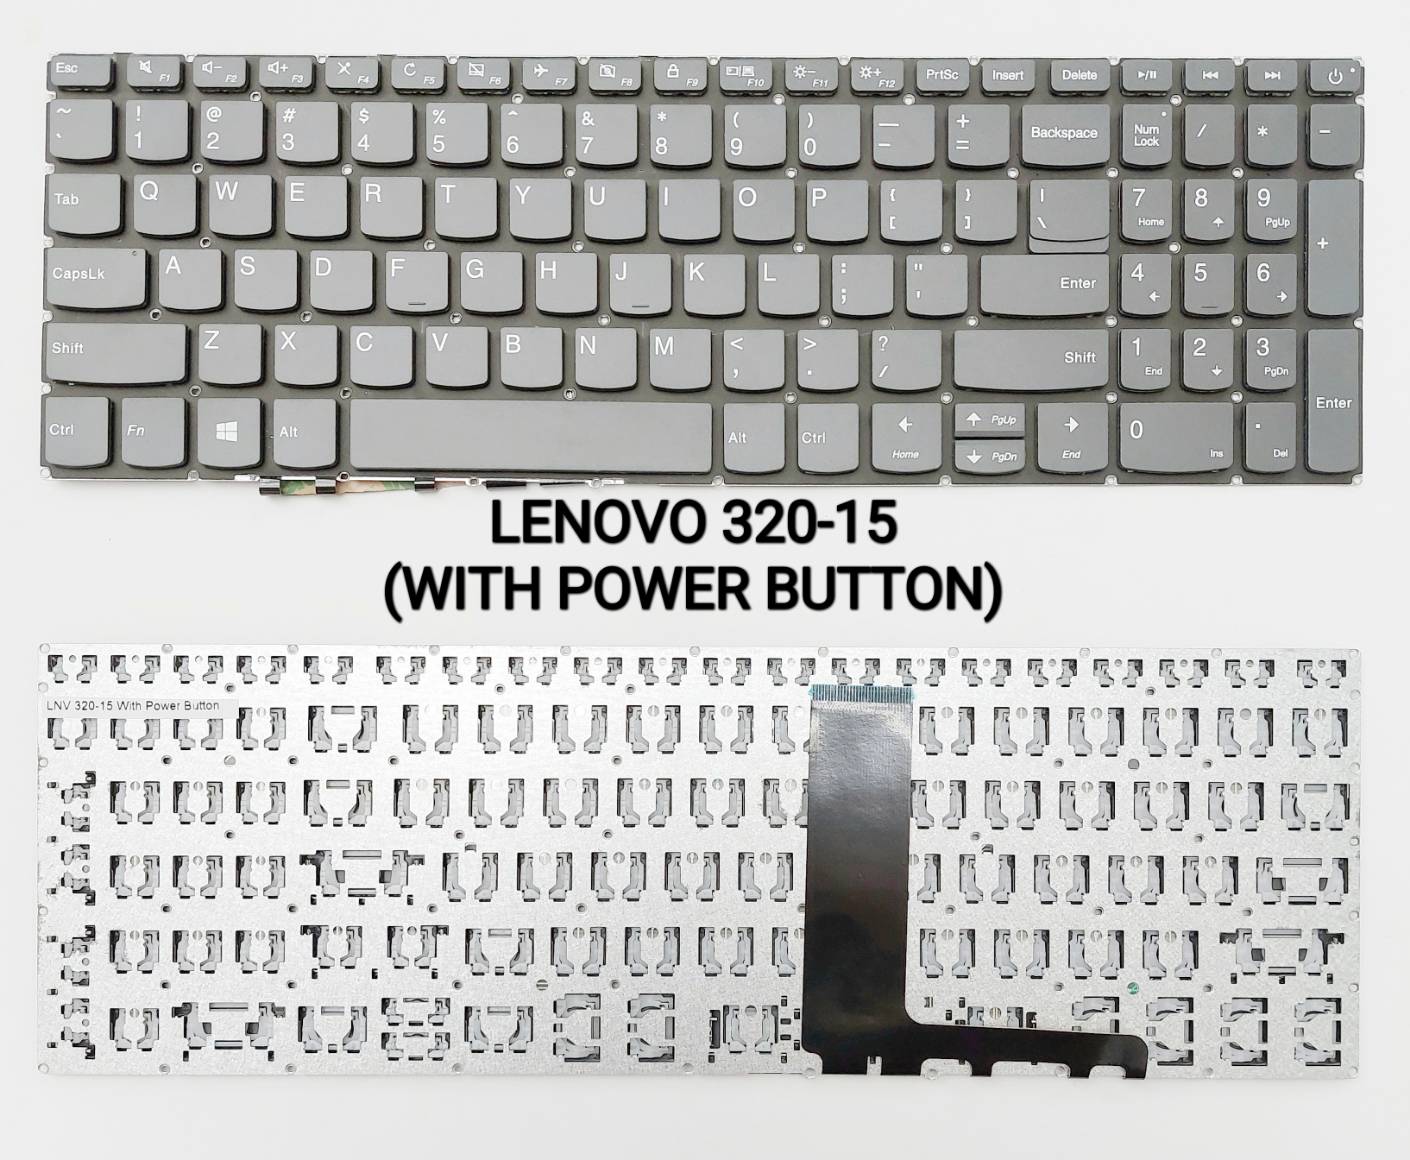 LENOVO 320-15 KEYBOARD (WITH POWER BUTTON)